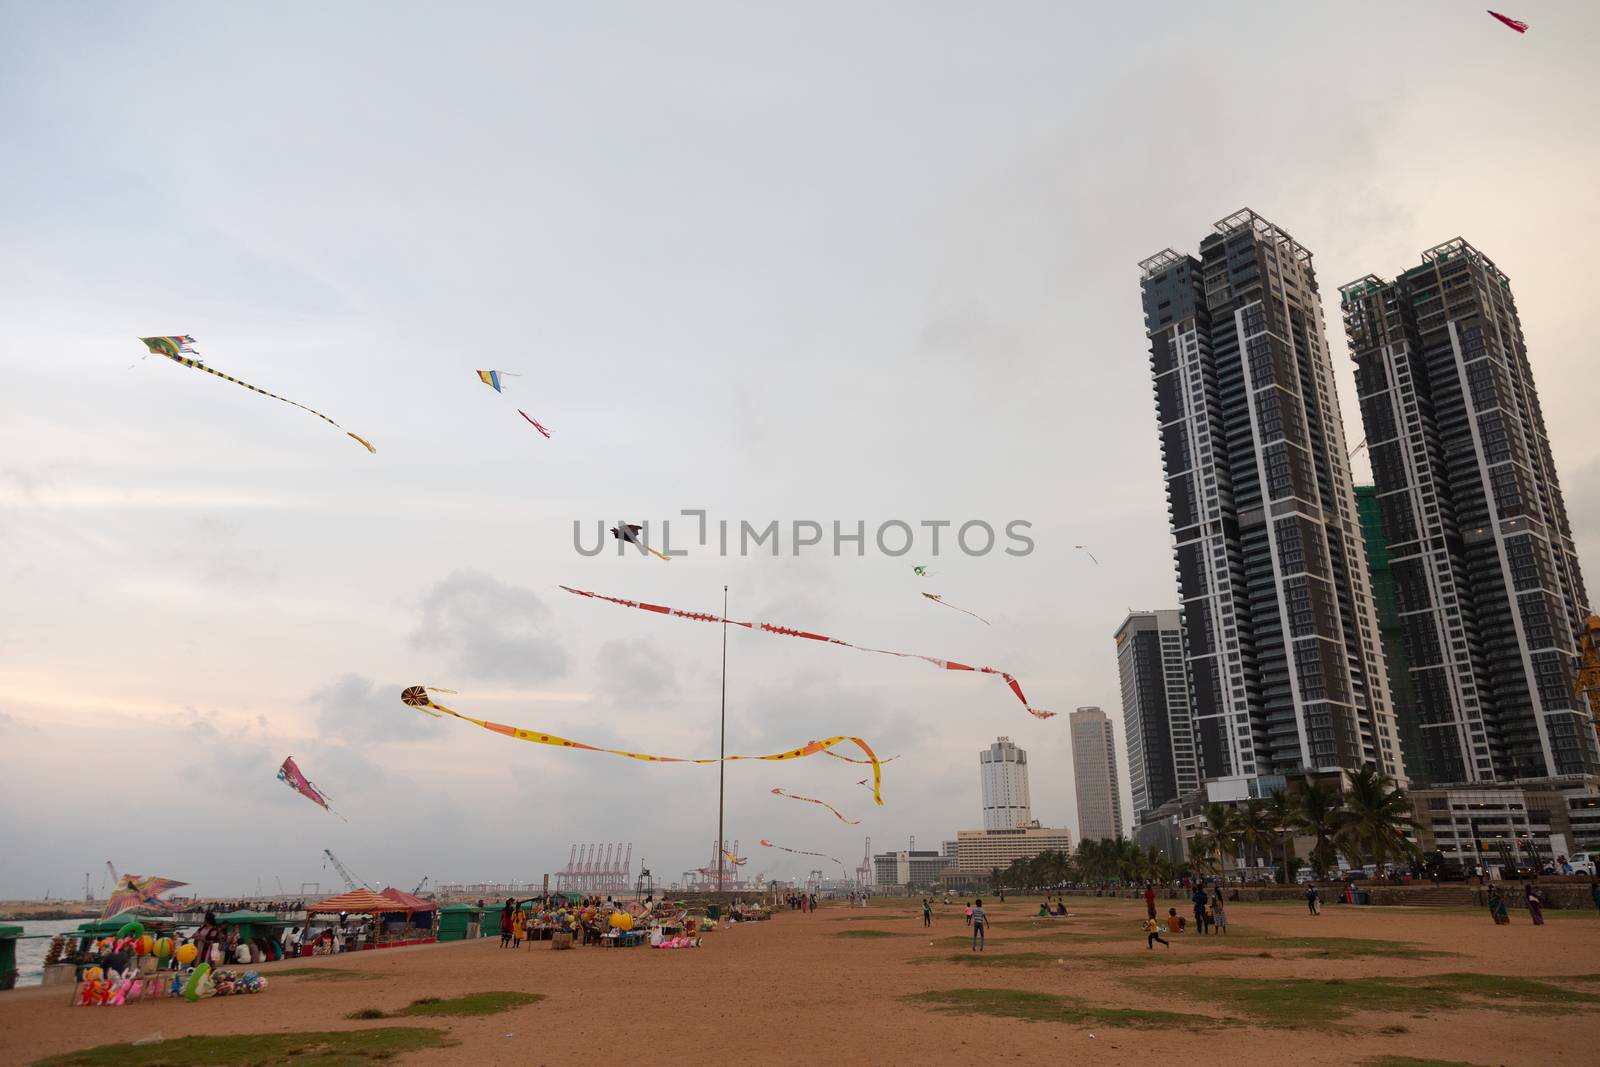 Colombo Sri Lanka 4.25.2018 People flying kites Galle fort road seafront sunset by kgboxford